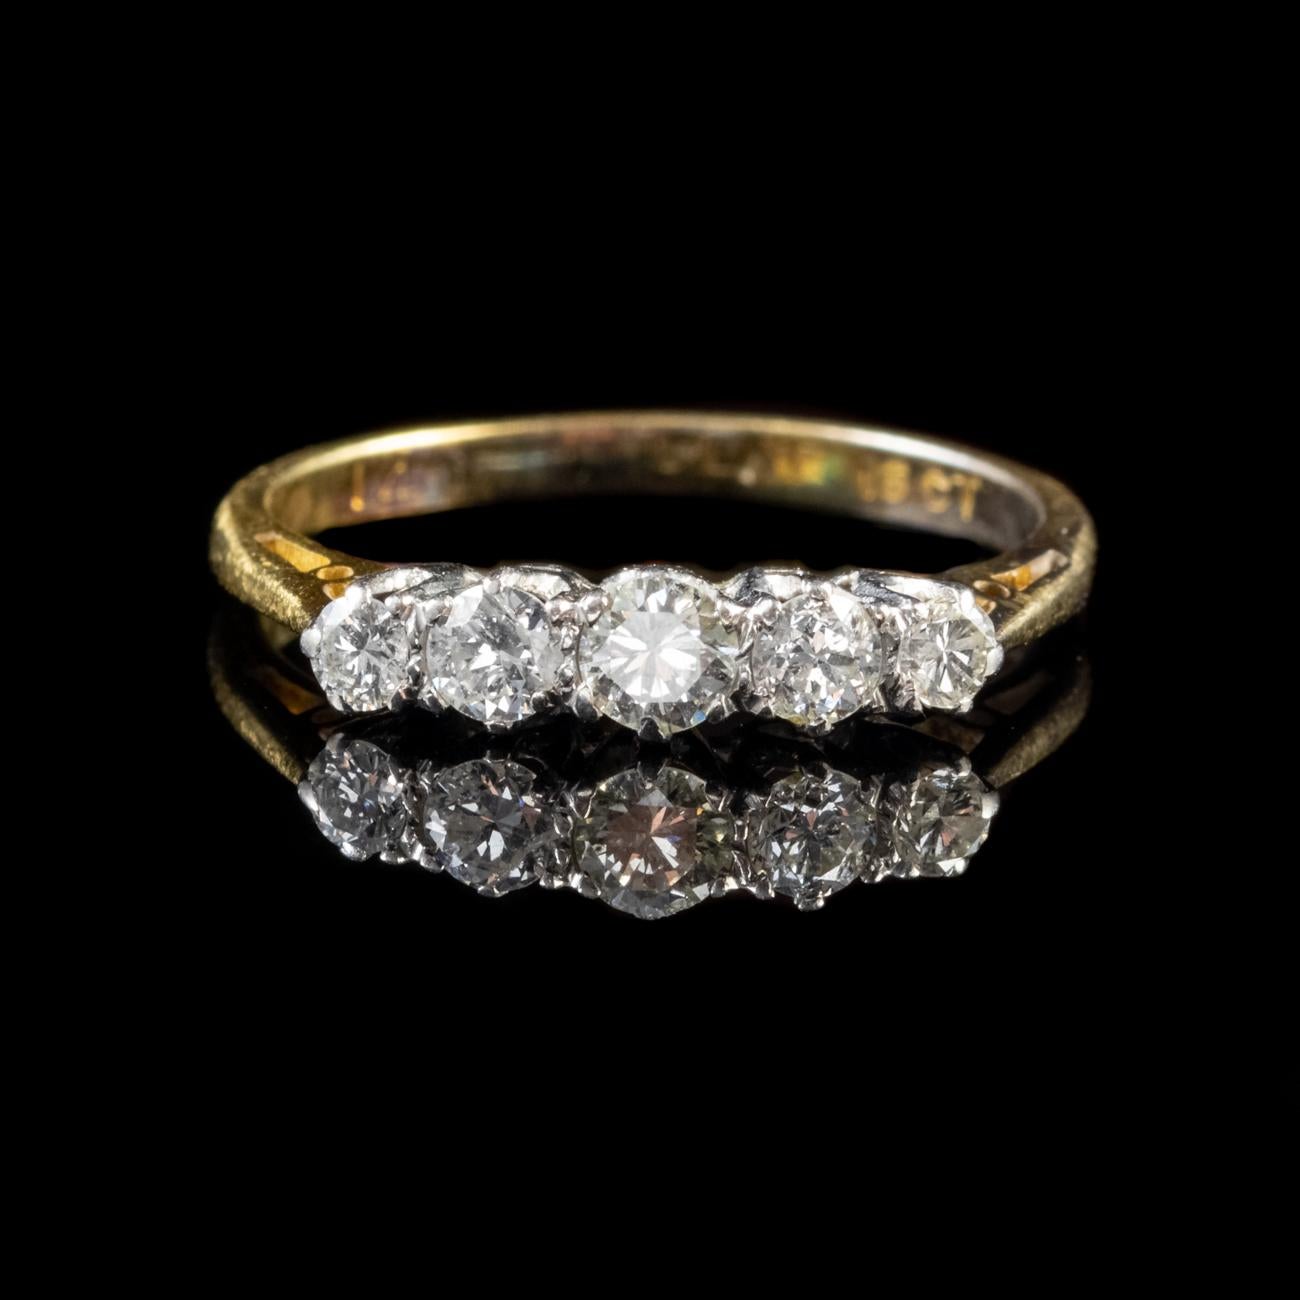 This beautiful Antique Edwardian ring features an 18ct Yellow Gold shank and an ornate Platinum gallery. The gallery is set with five sparkling old cut Diamonds which graduate in size and total 0.75ct.

Diamonds are a stone of perfection. Their